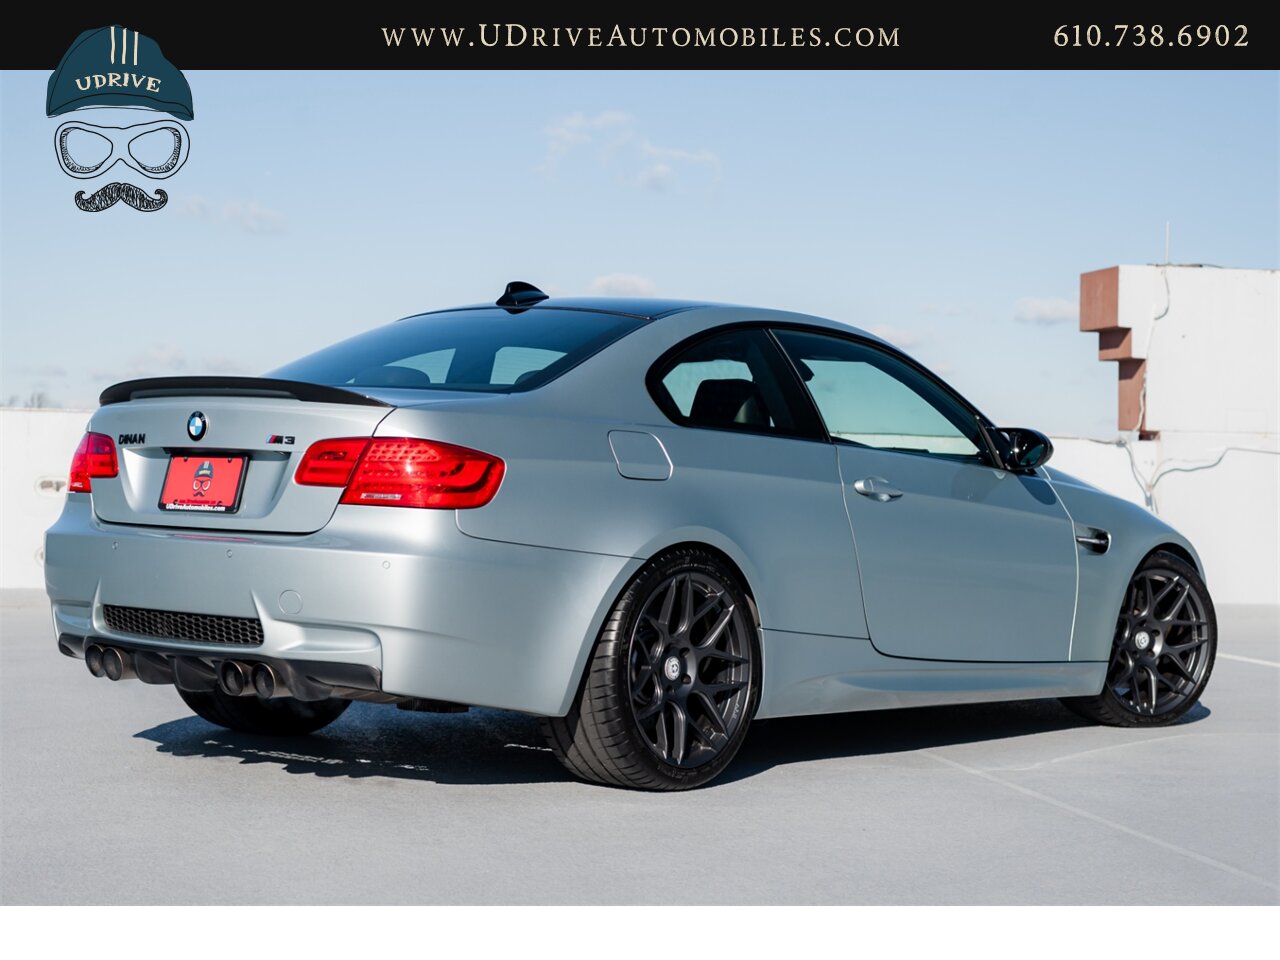 2008 BMW M3 Dinan S3-R M3 1 of 36 Produced DCT  1 Owner Full Service History 4.6L Stroker V8 - Photo 3 - West Chester, PA 19382